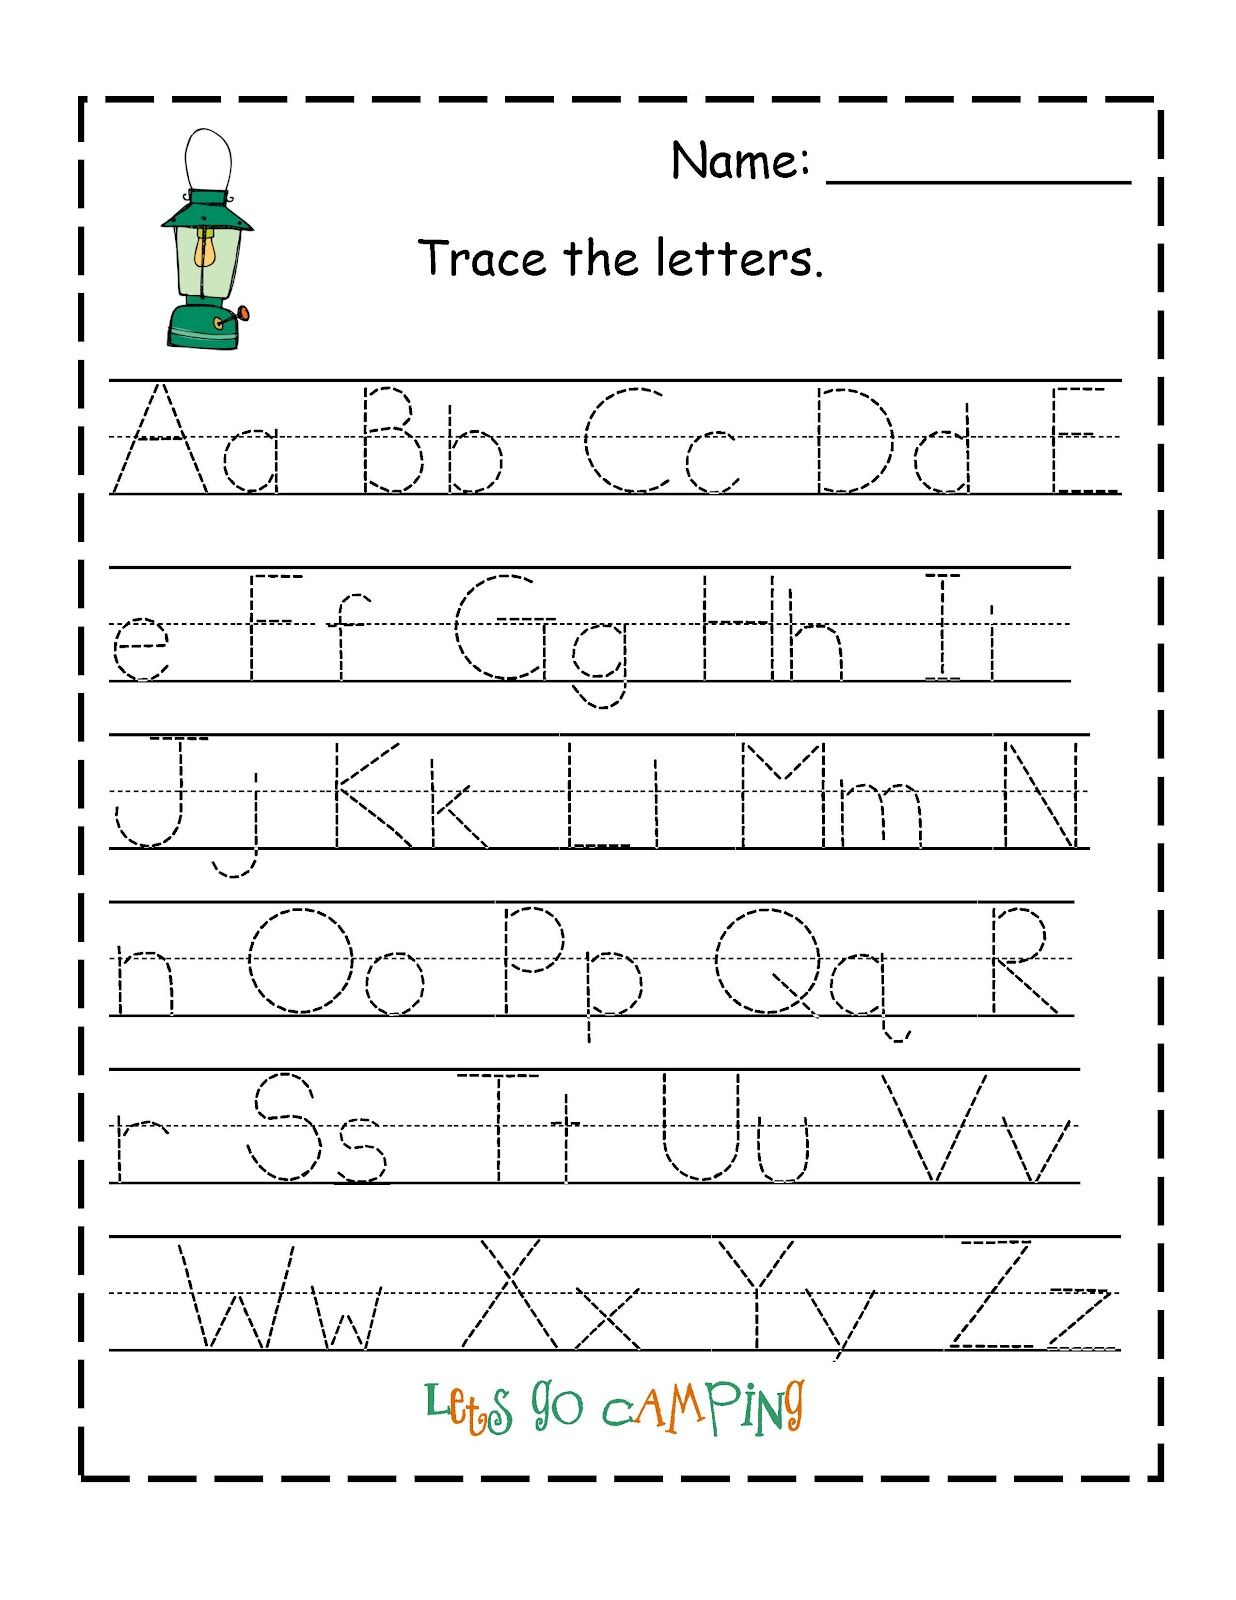 Camping+New+Template+For+A-Z (1236×1600) | Preschool